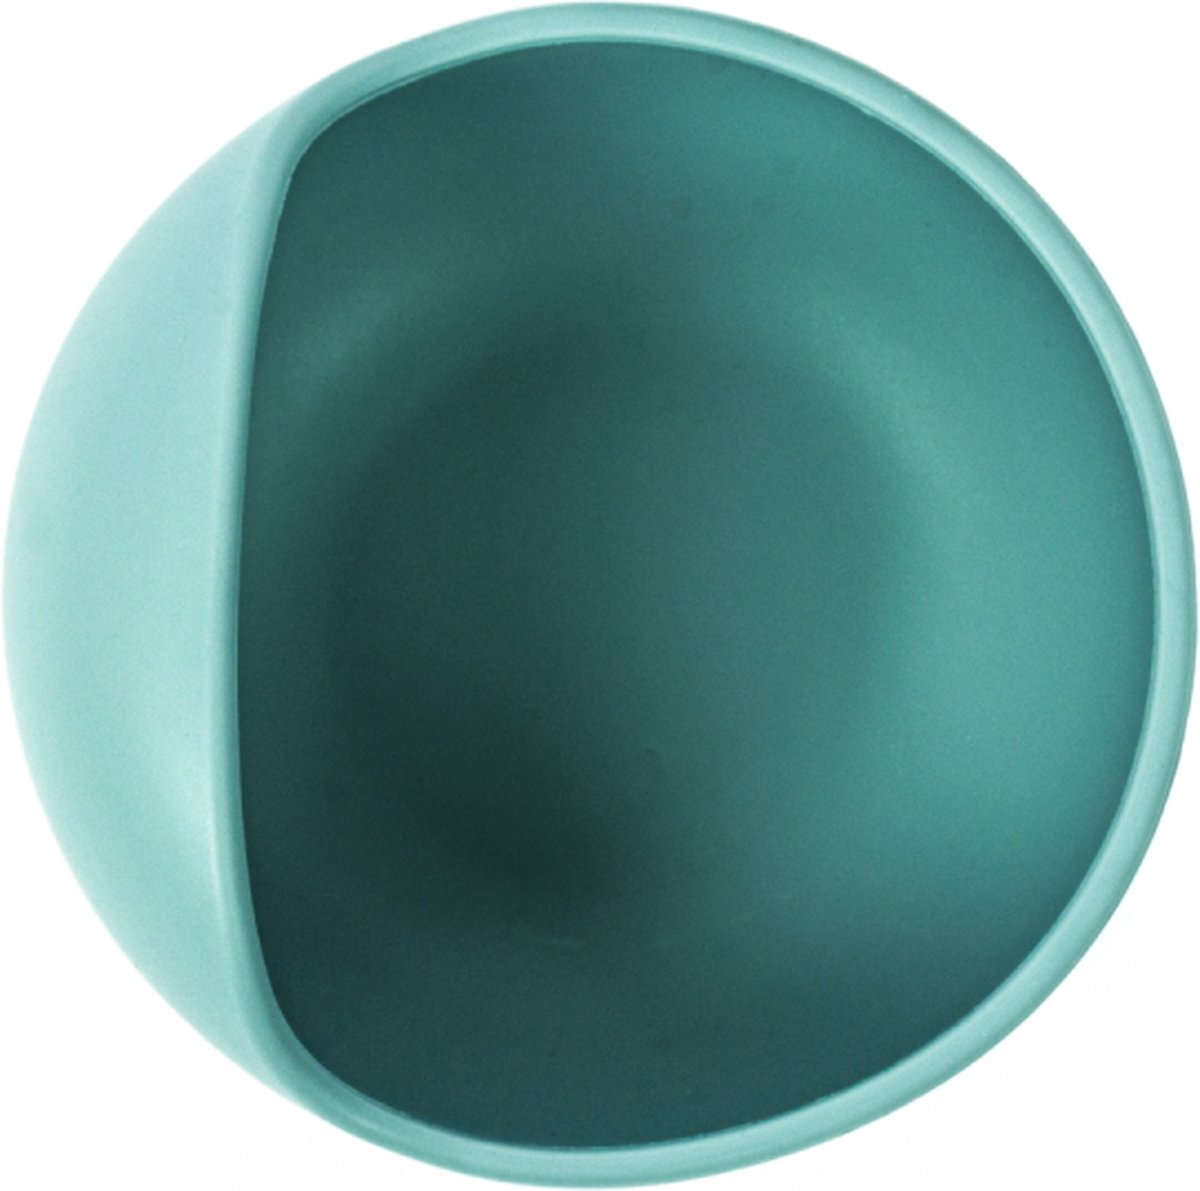 Sevibaby Turquoise Silicone Kom met Zuignap 508-15